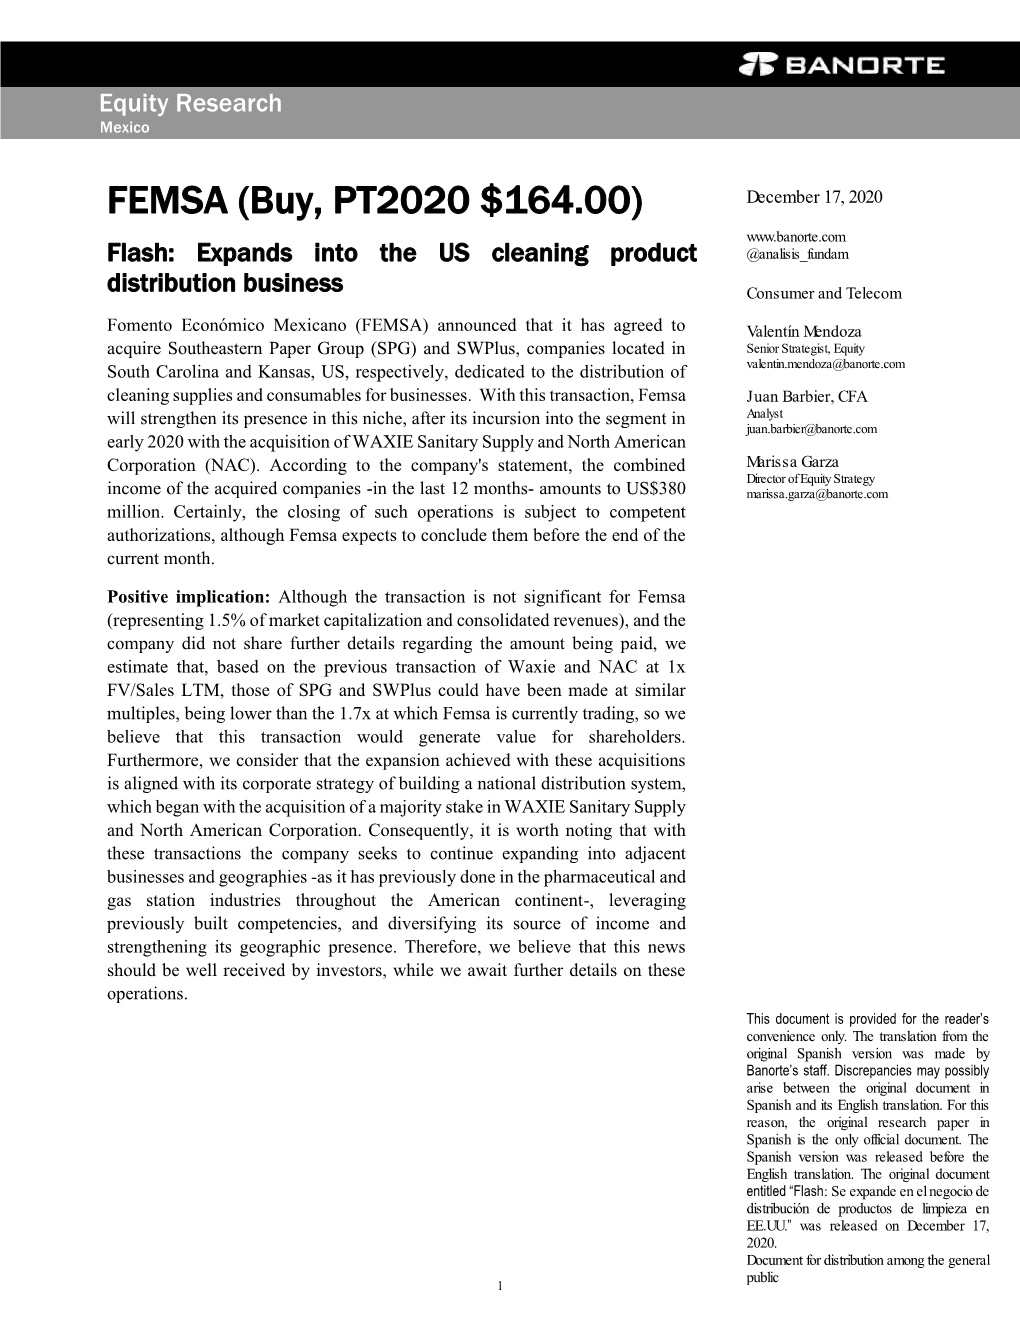 FEMSA (Buy, PT2020 $164.00) Flash: Expands Into the US Cleaning Product @Analisis Fundam Distribution Business Consumer and Telecom